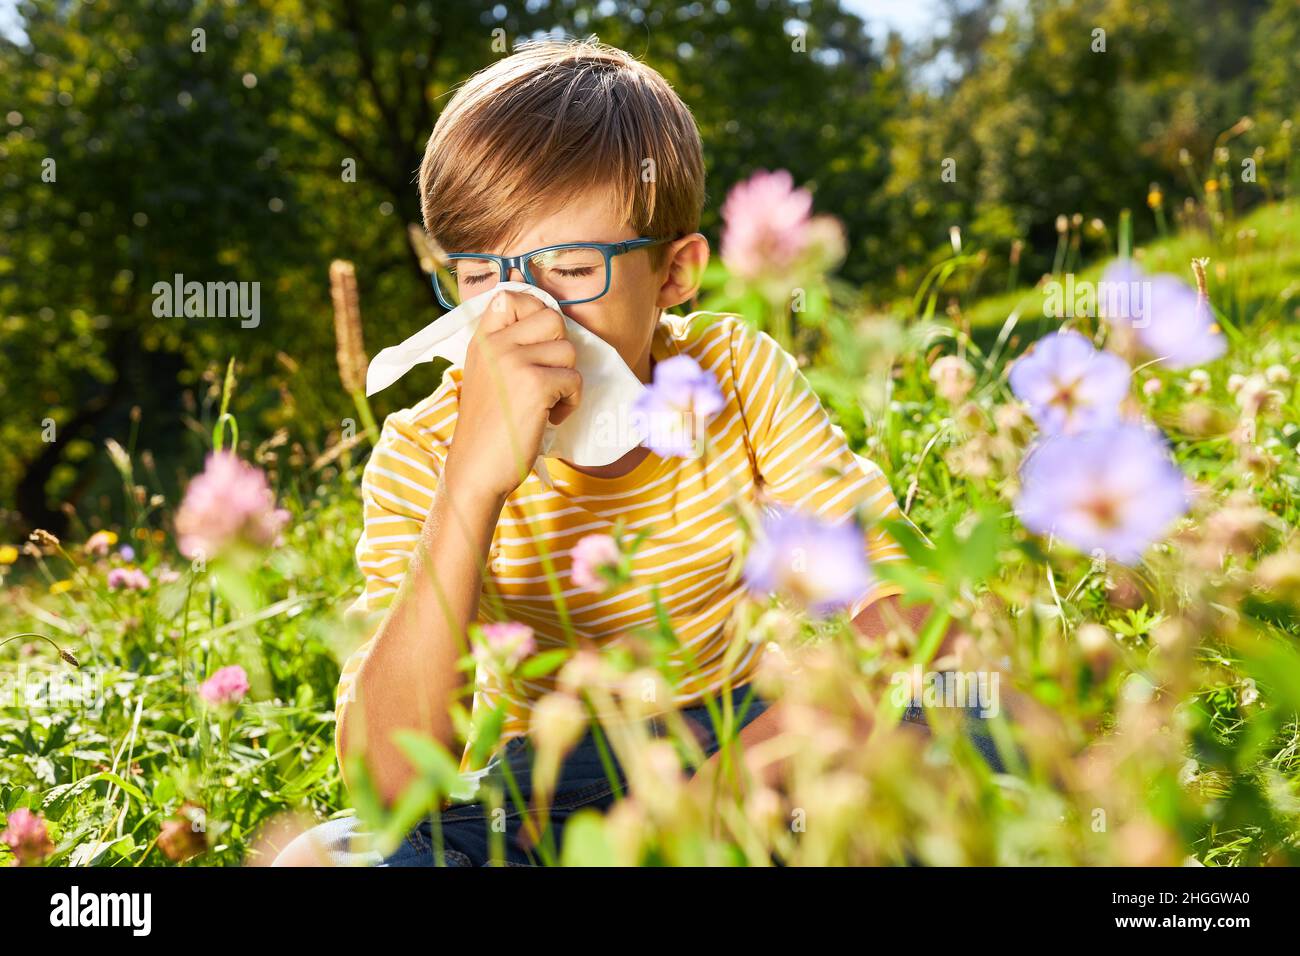 Boy with a runny nose or hay fever blowing his nose in a blooming meadow Stock Photo